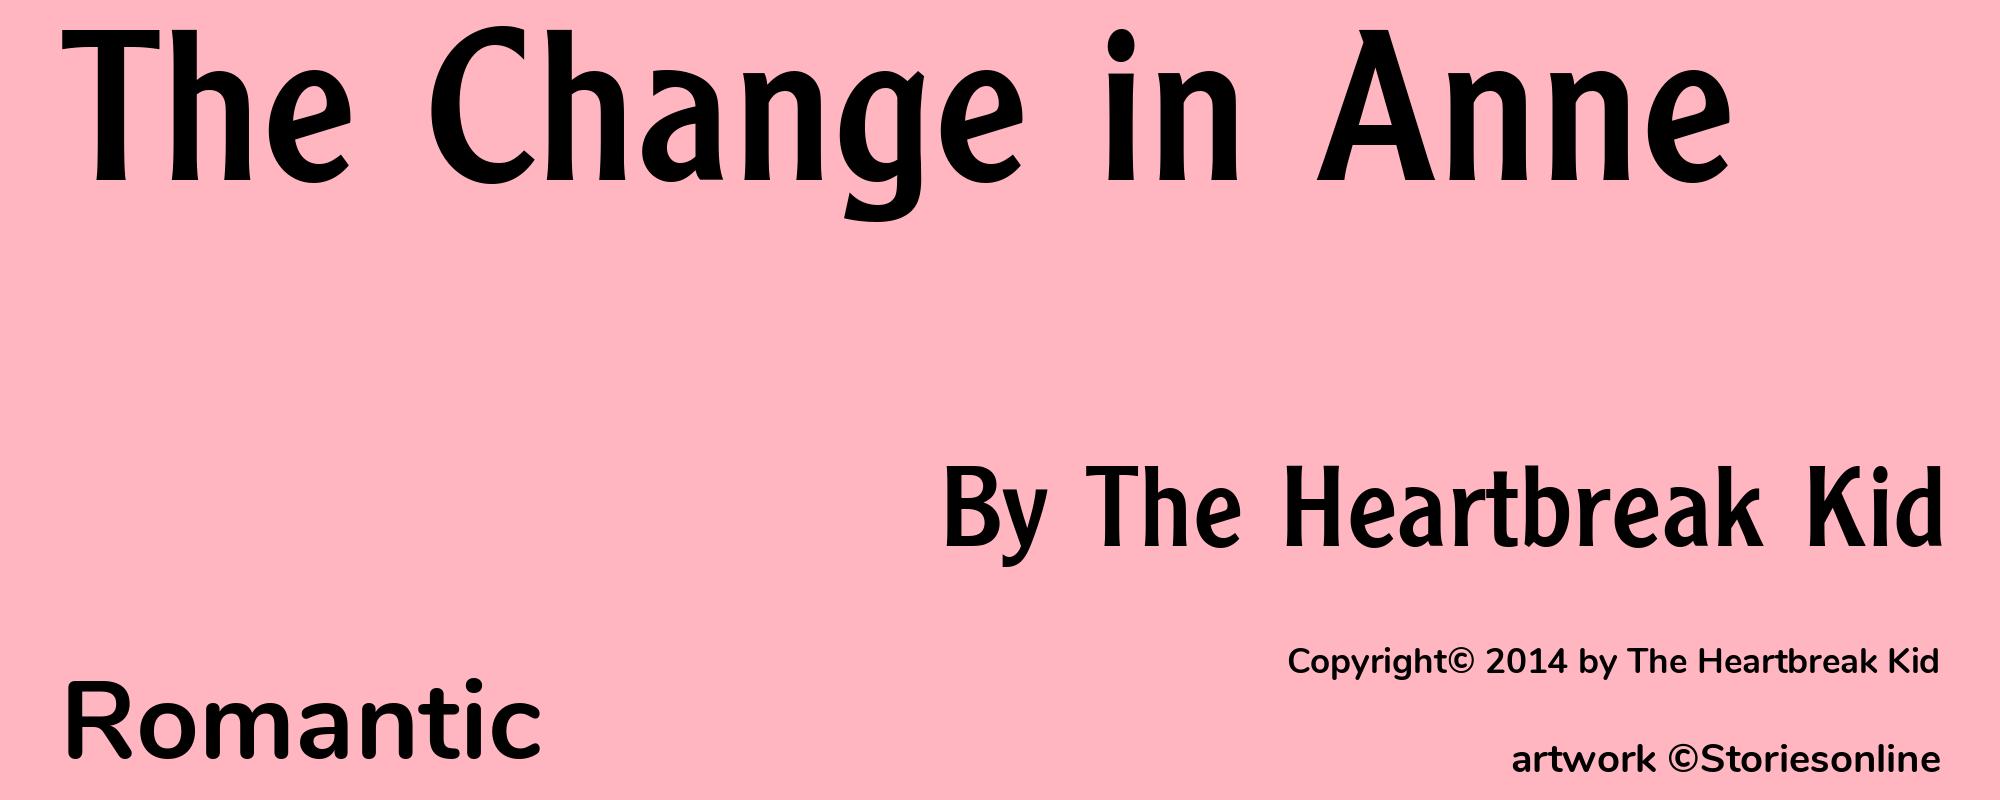 The Change in Anne - Cover